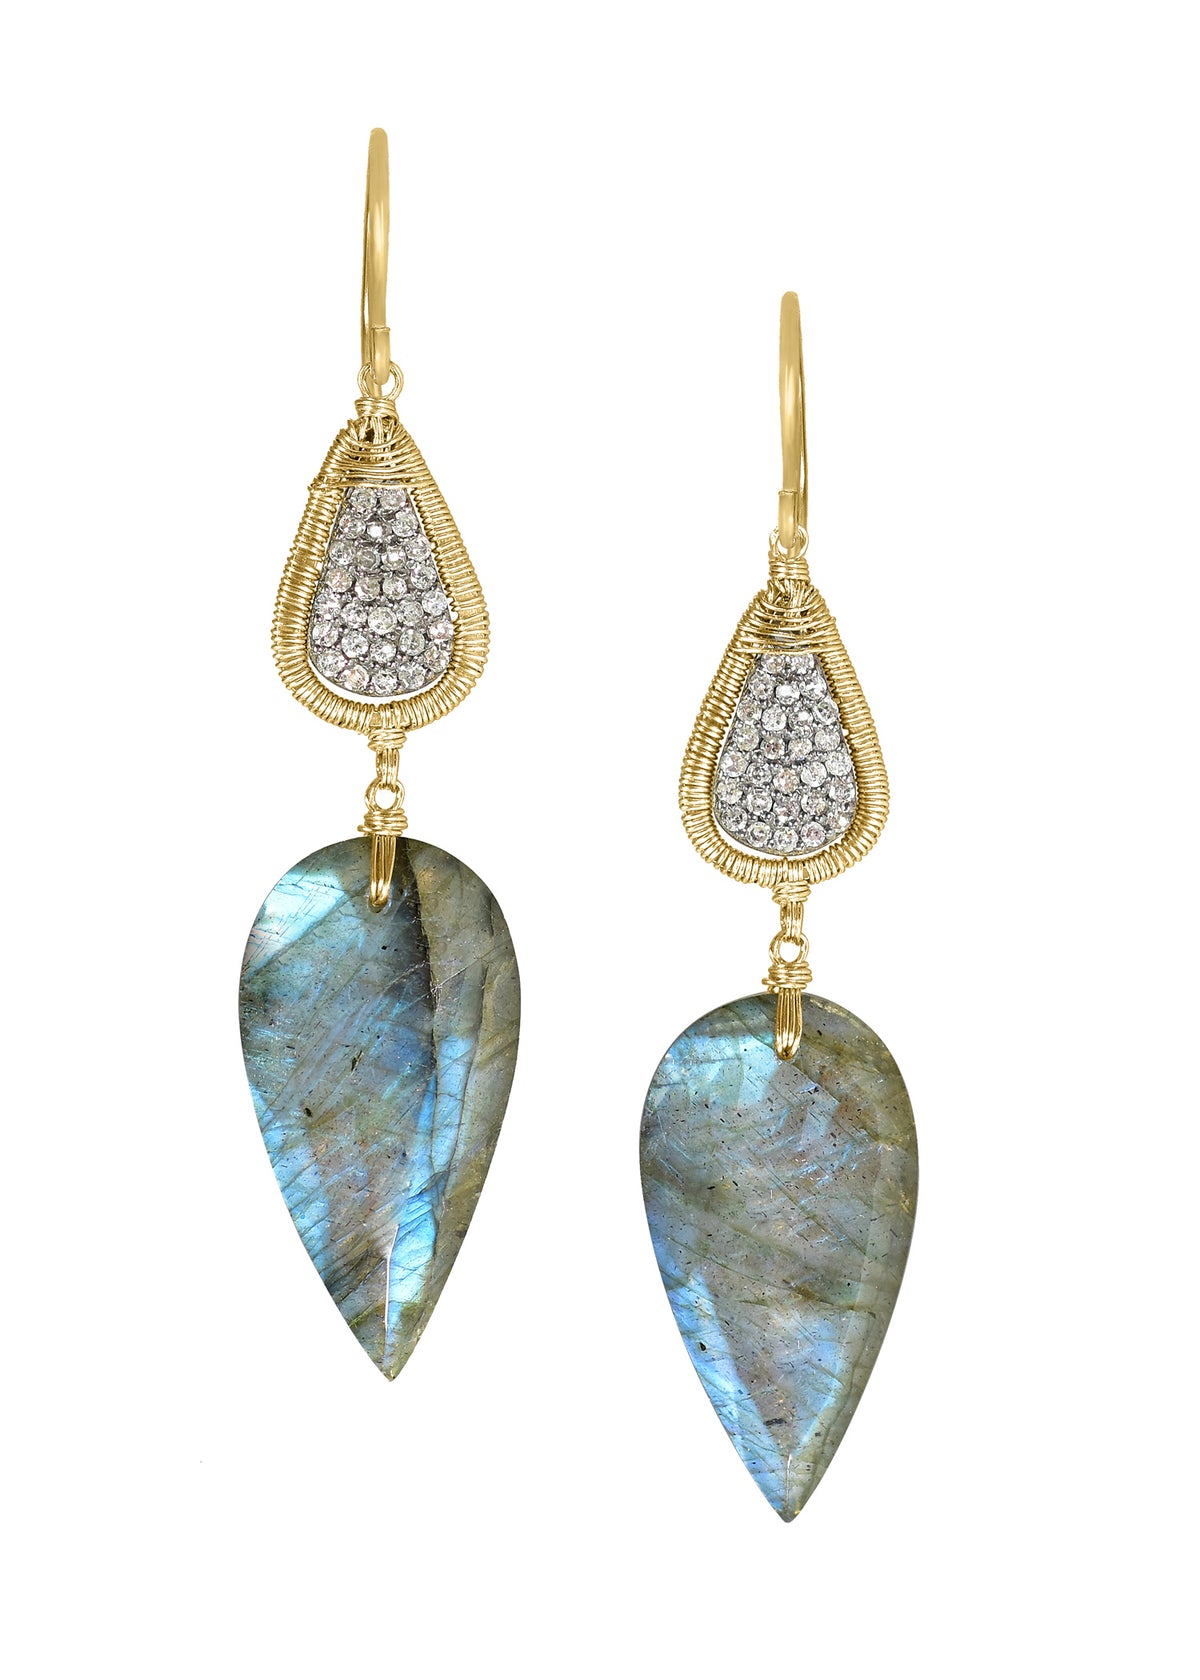 Diamond Labradorite 14k gold Sterling silver Mixed metal Special order only Earrings measure 2-1/4&quot; in length (including the ear wires) and 1/2&quot; in width at the widest point Handmade in our Los Angeles studio